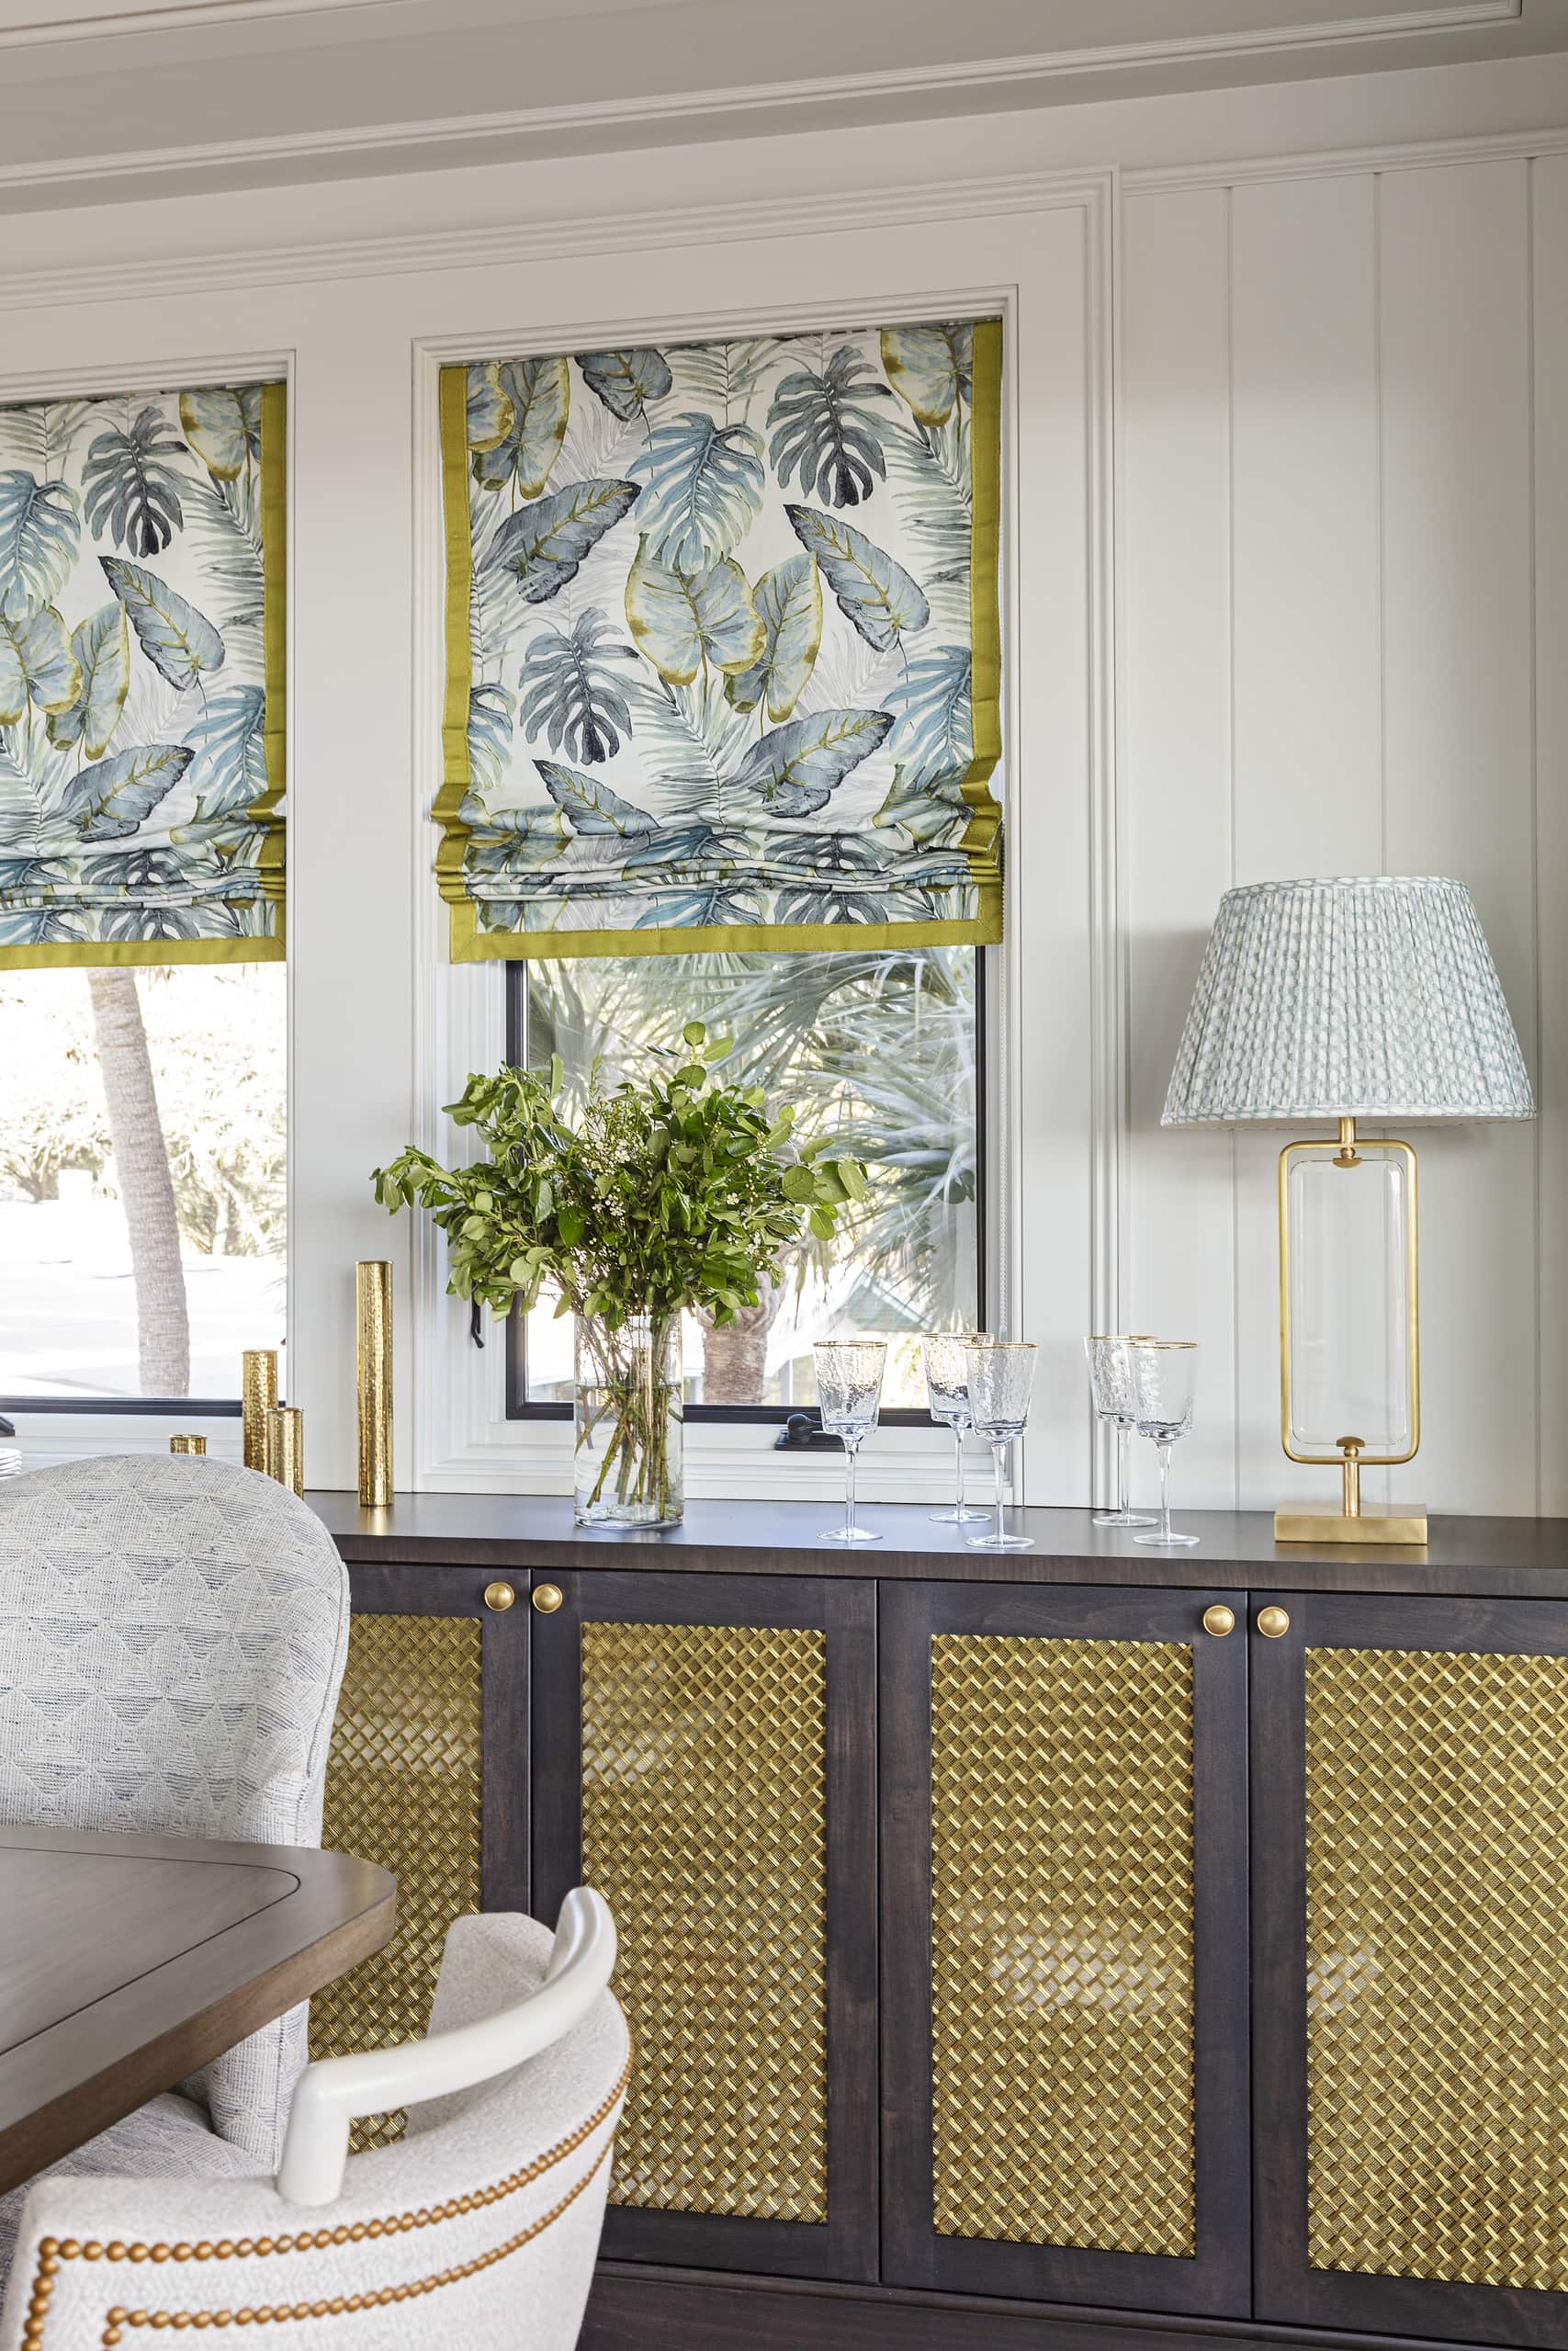 Transitional home tour featuring traditional decor, designed by Margaret Donaldson